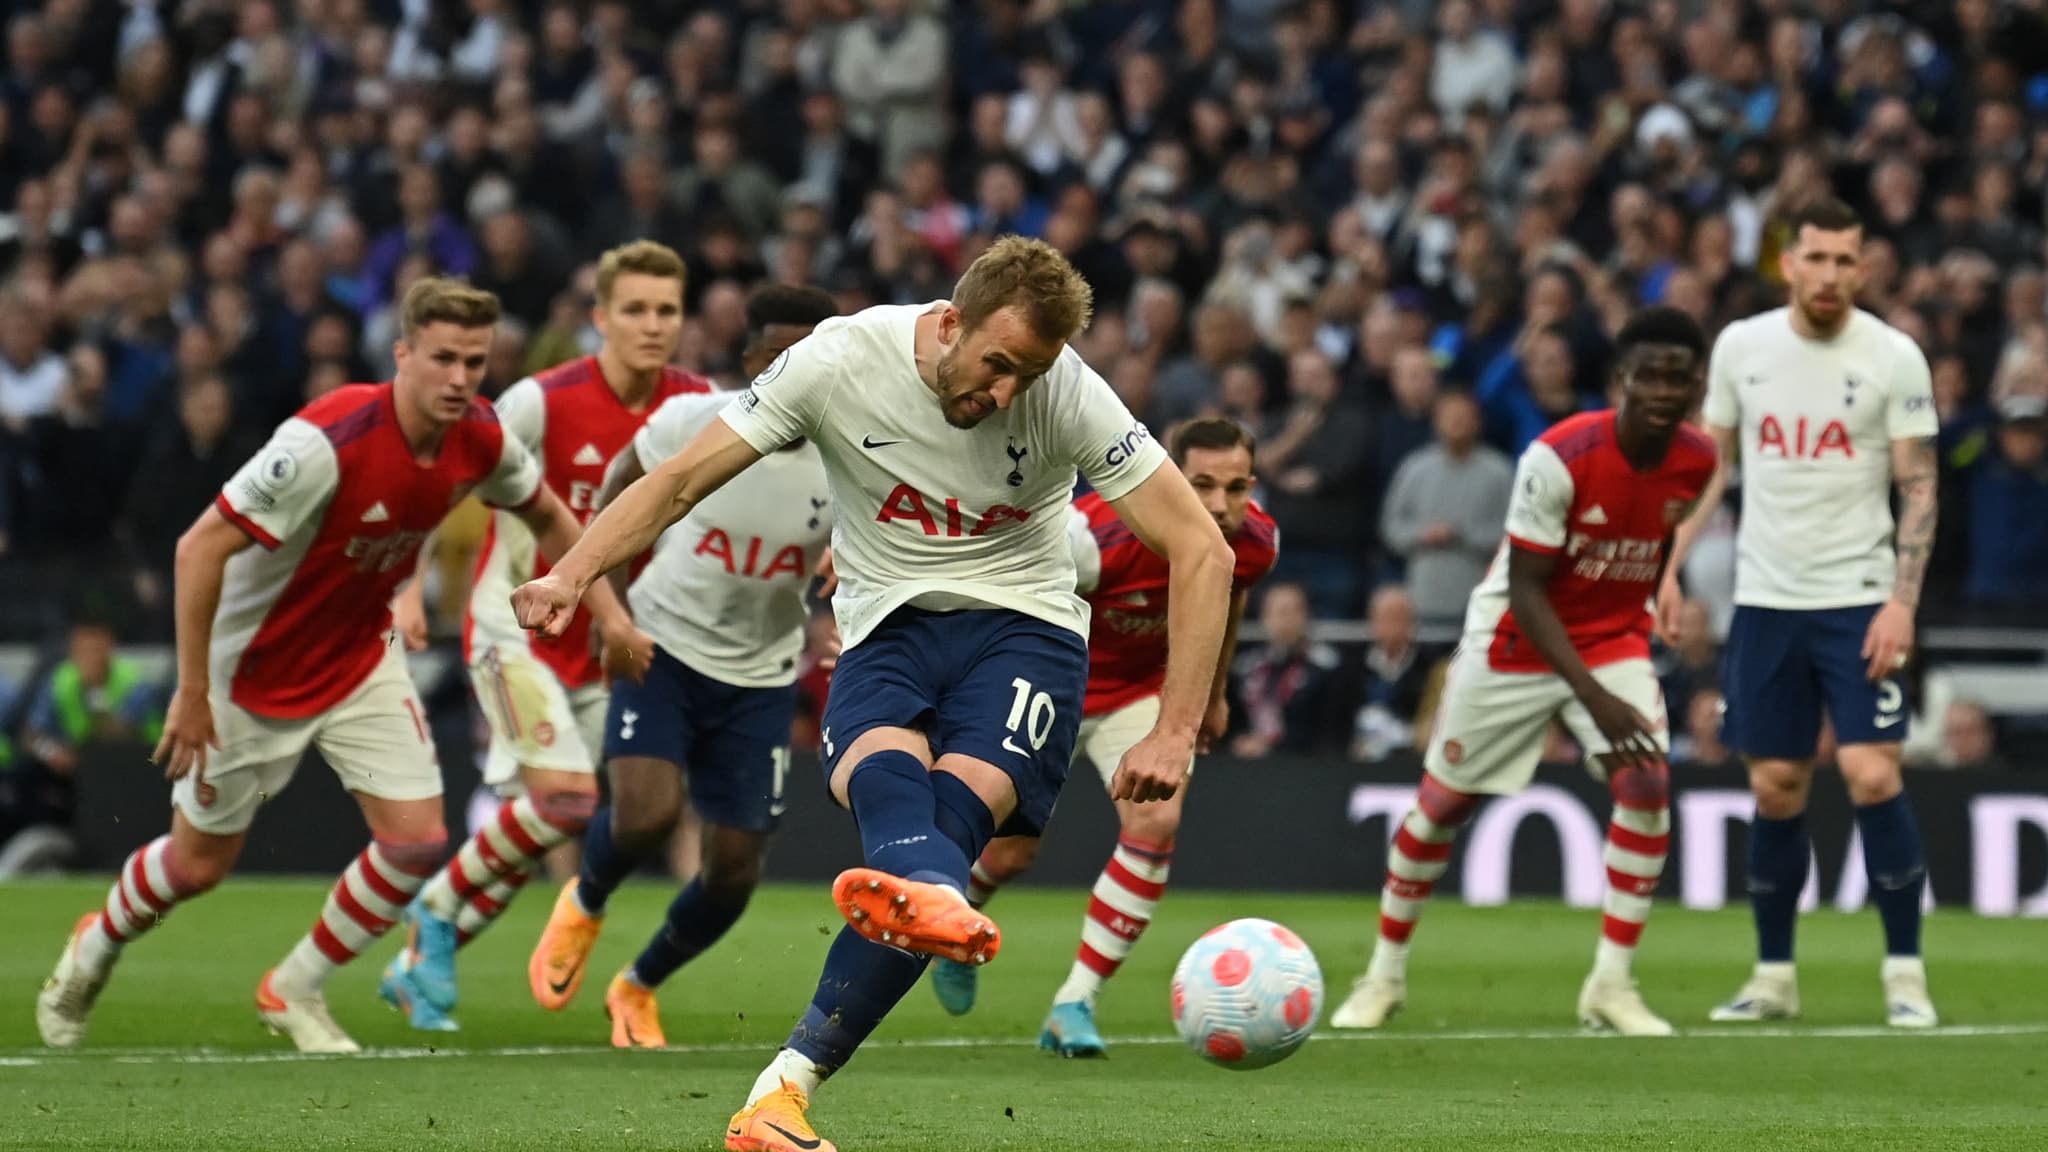 Tottenham elusive, the race for the top four has been revived